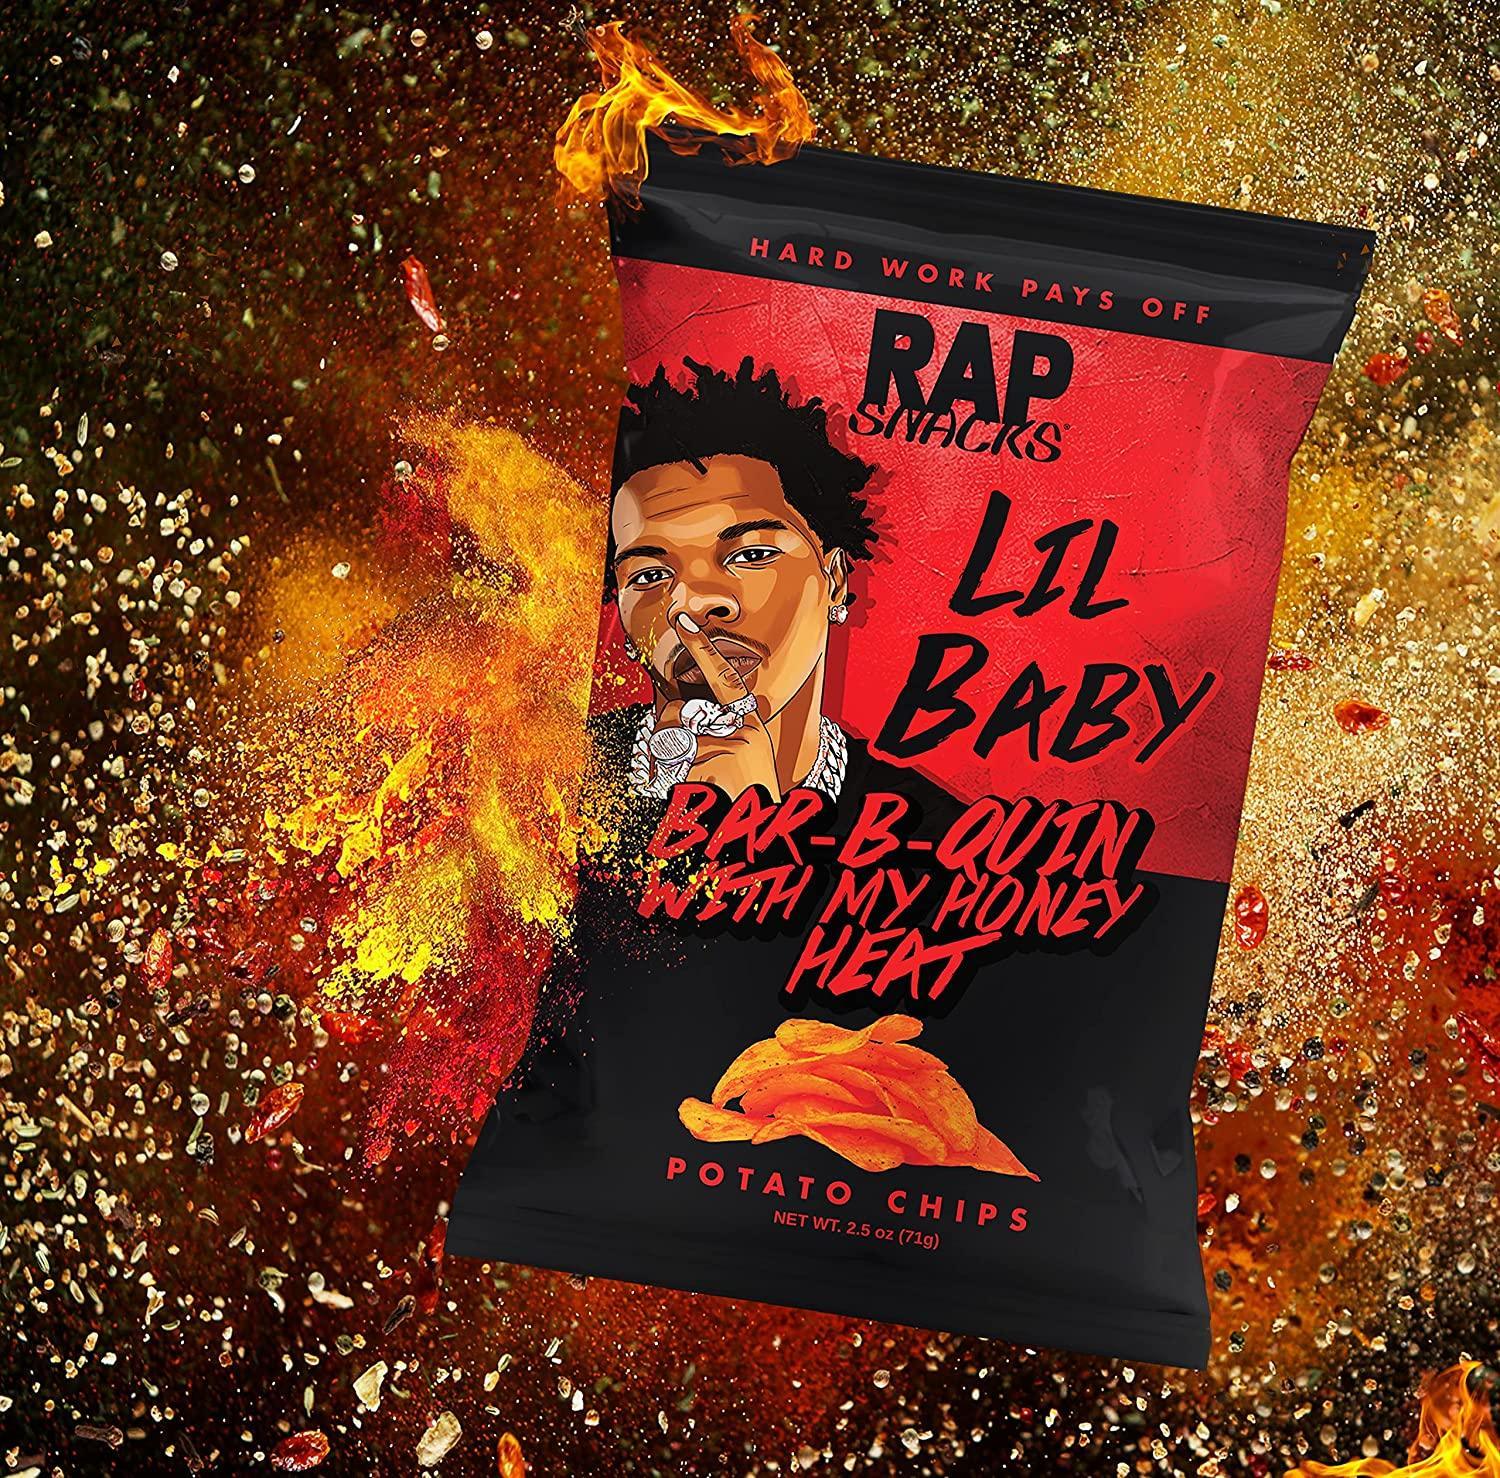 Rap Snacks BBQ-Lil Baby Quin with My Honey Heat - Extreme Snacks